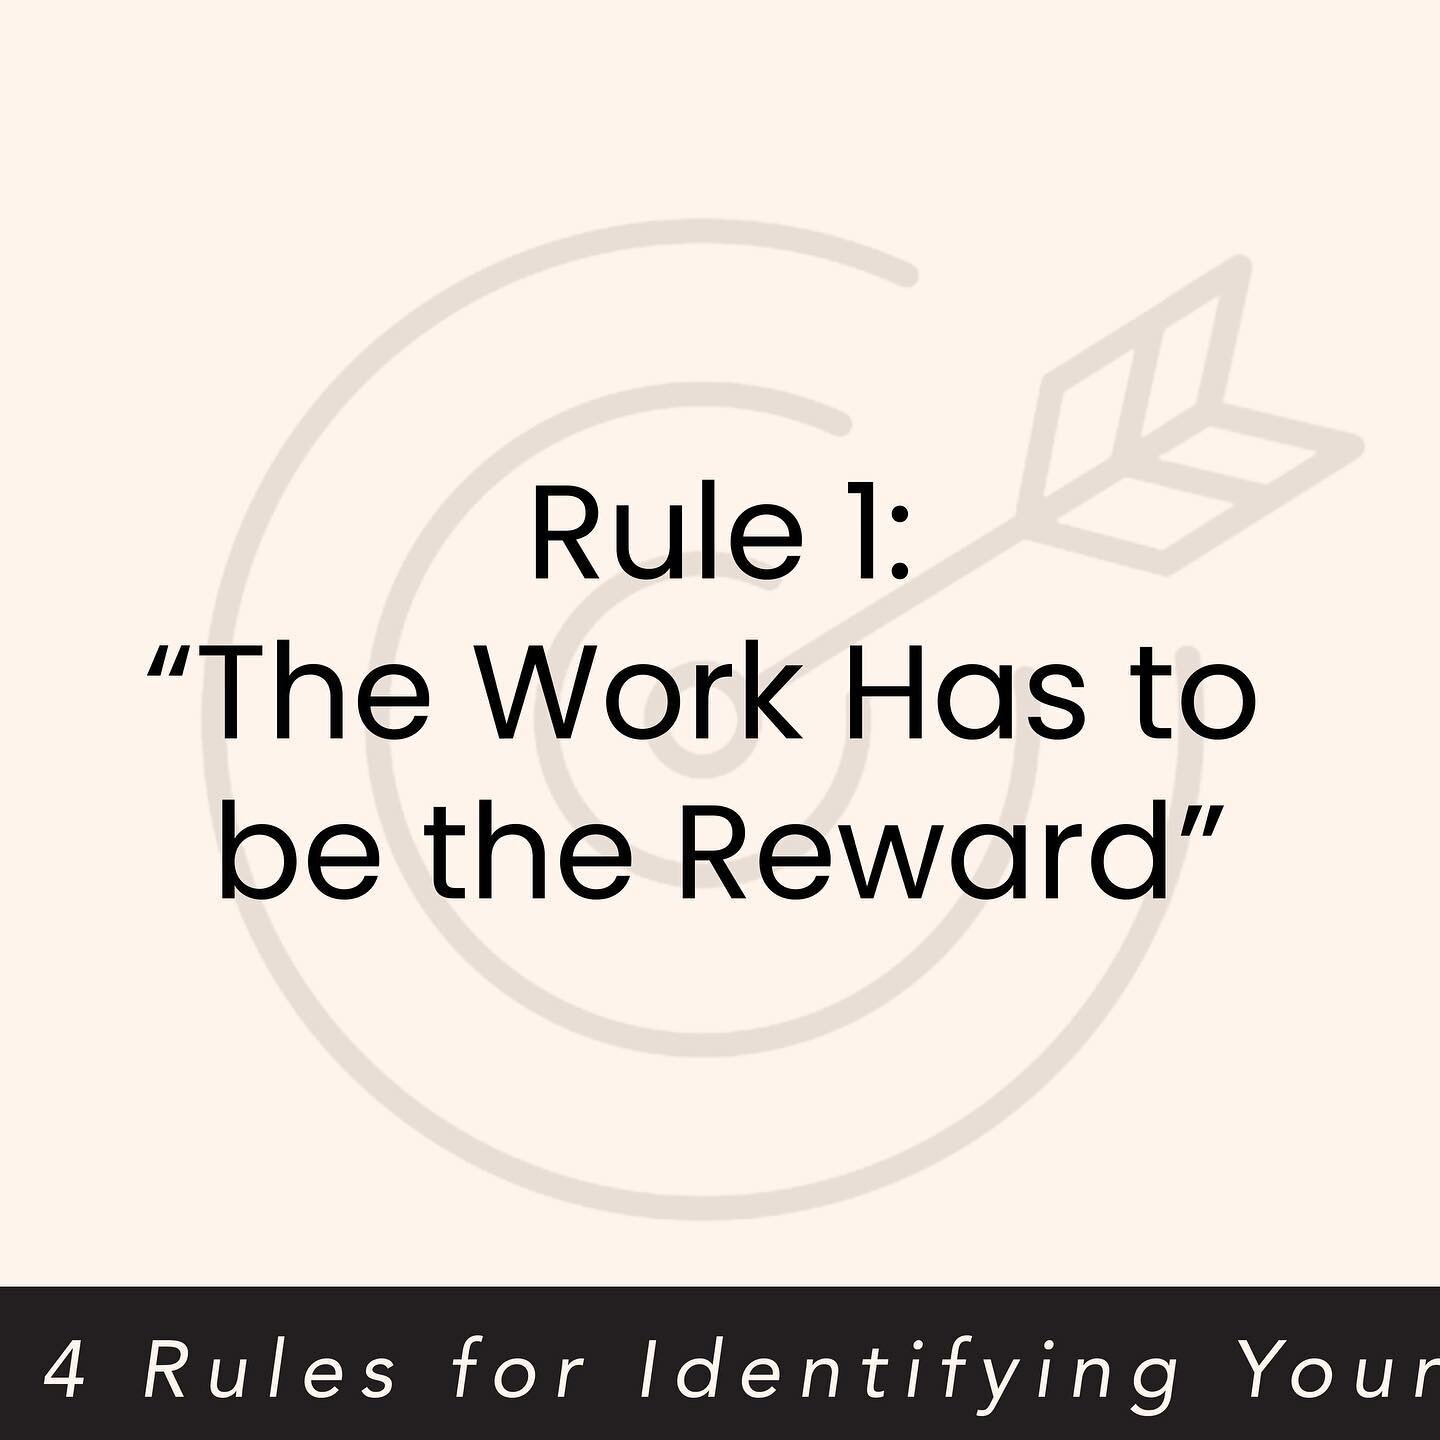 Swipe for the 4 Rules for Identifying Your Life&rsquo;s Work from @arthurcbrooks @theatlantic 

Which rule(s) resonate with you? 

#GivingRoses #Work #Career #GivingRosesPod